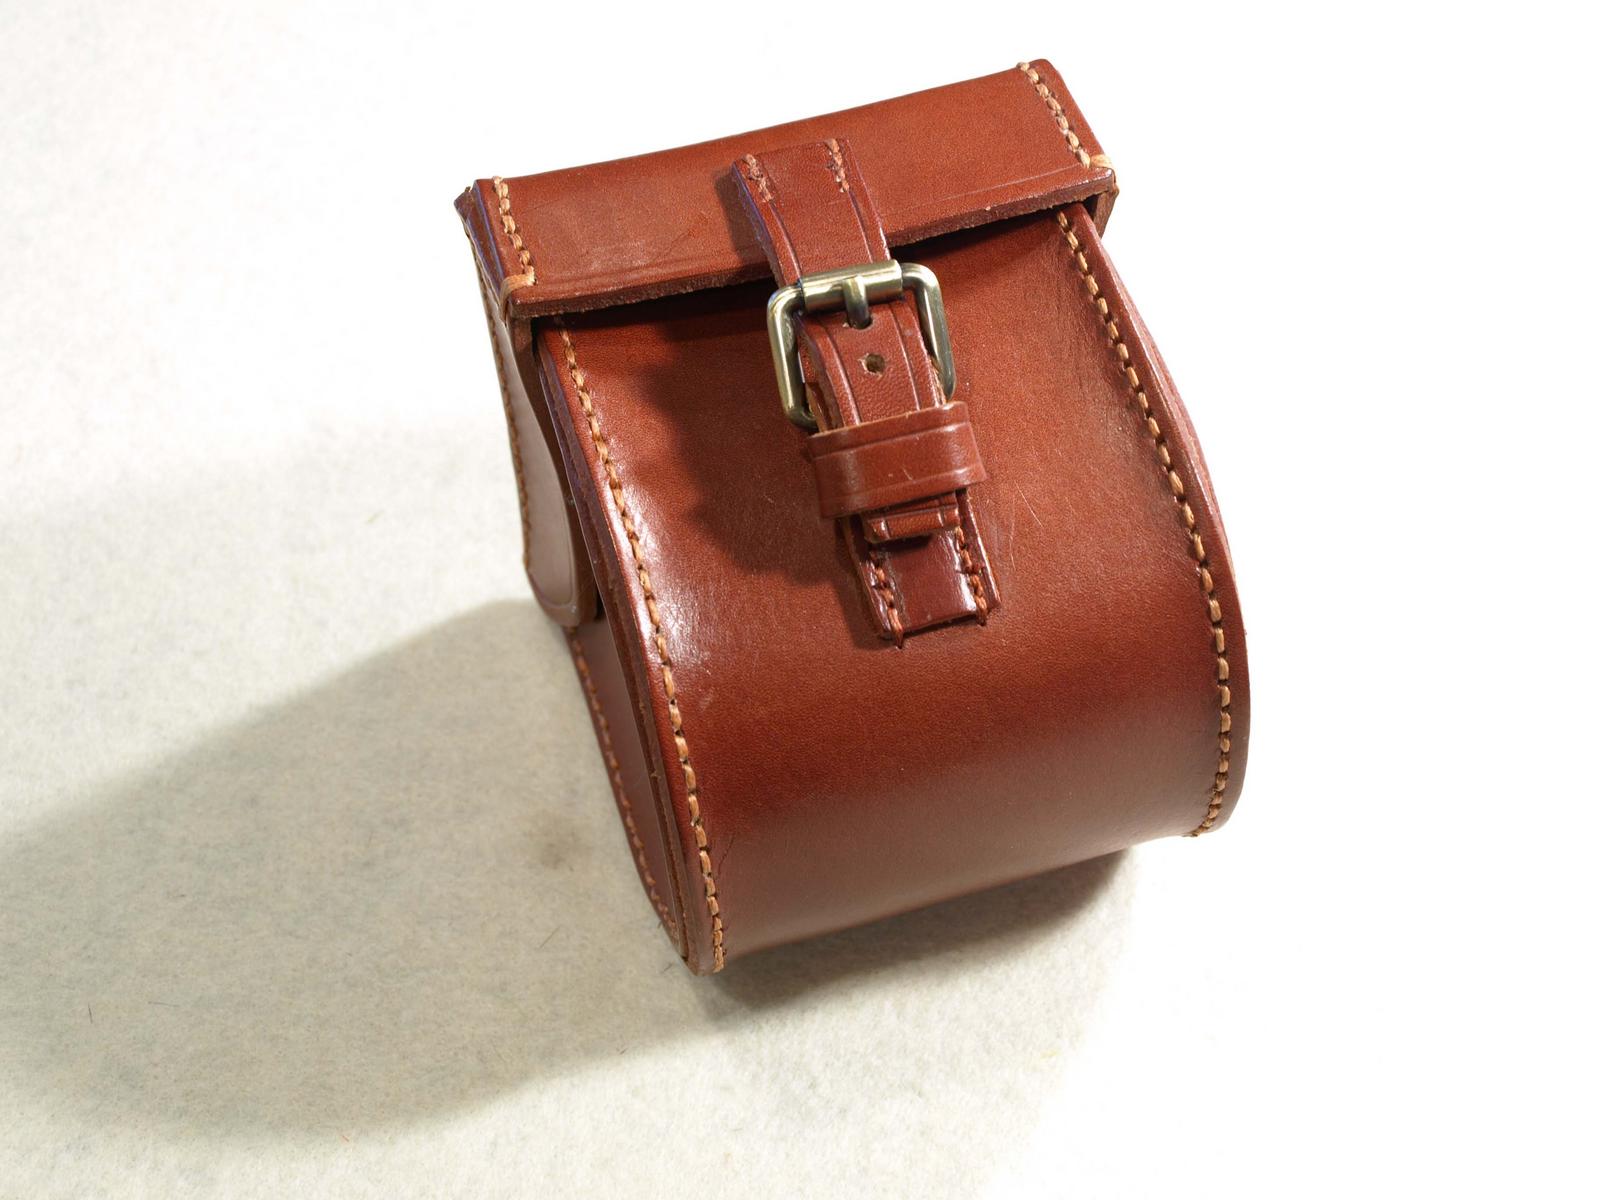 LEATHER FLY REEL CASE BY MAINE-MADE BEST